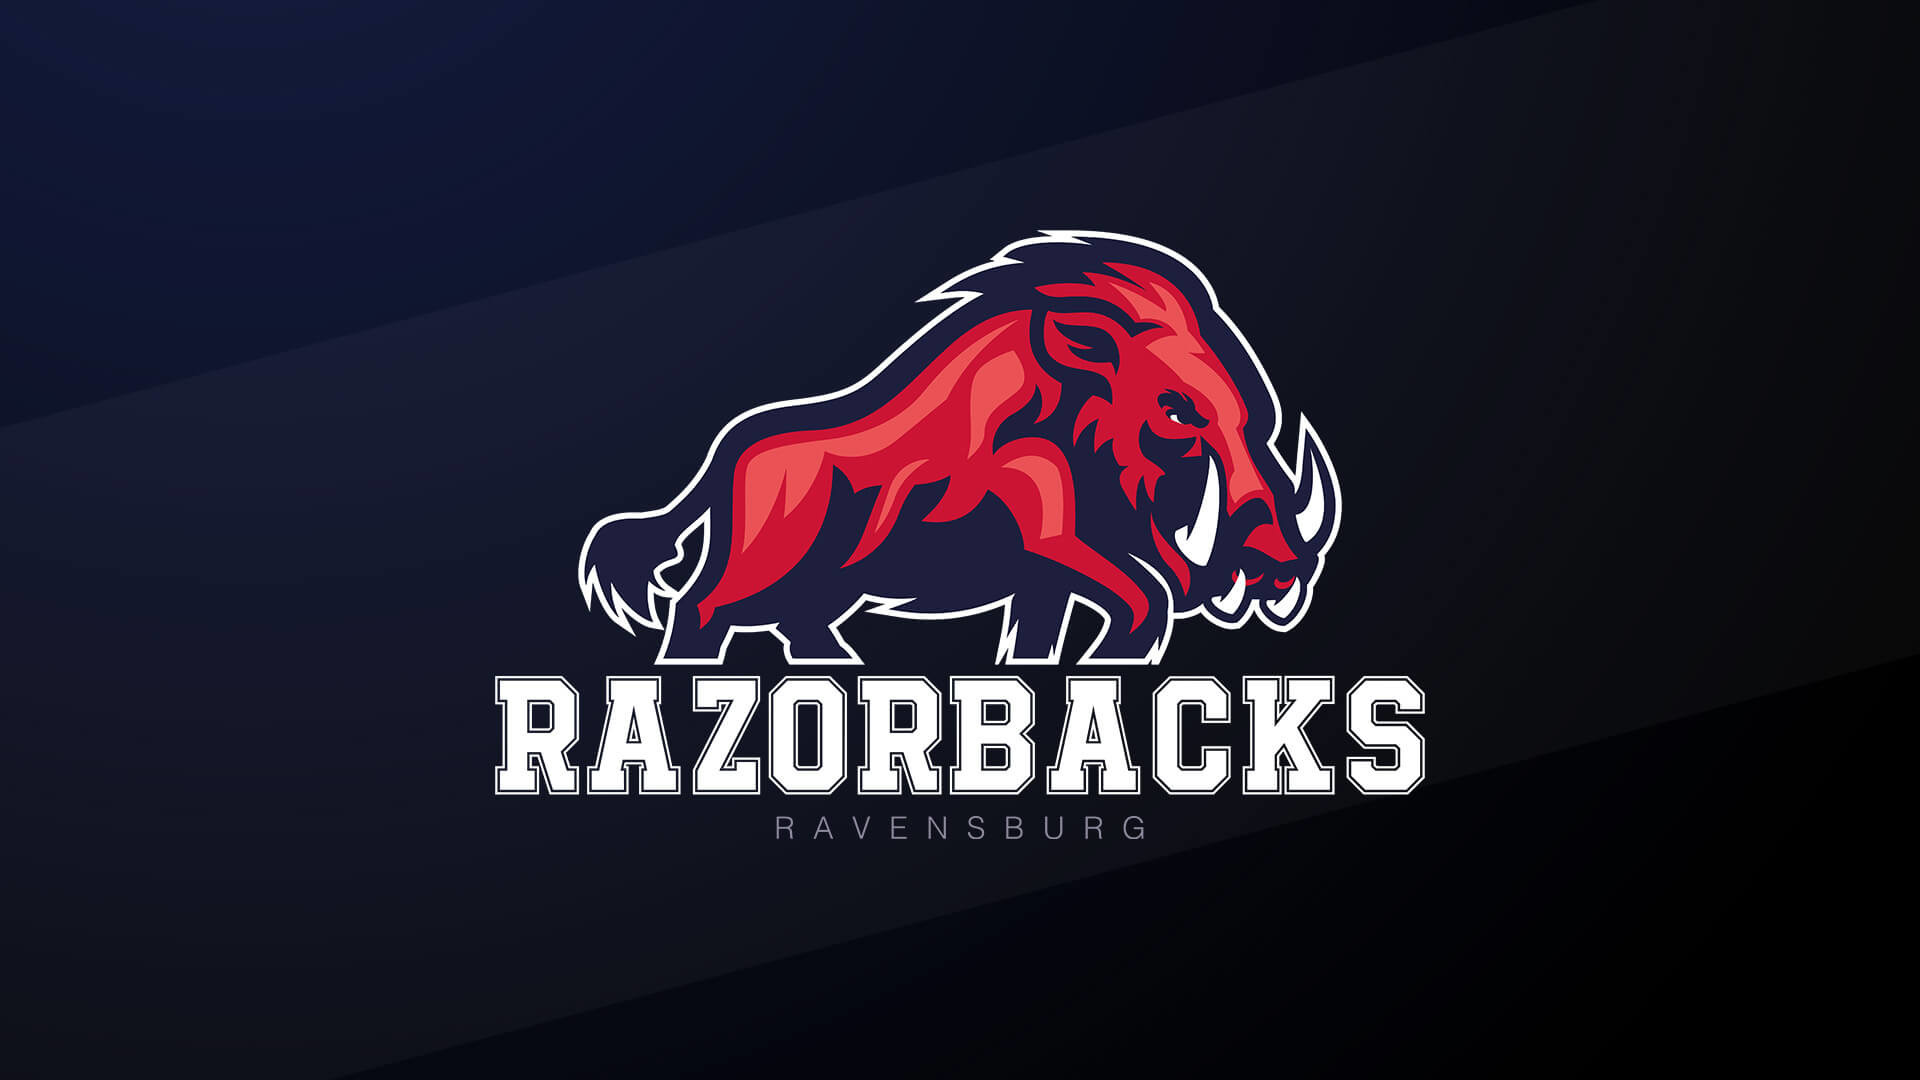 1920x1080 Here is different take on the Razorback logo from a German football team: